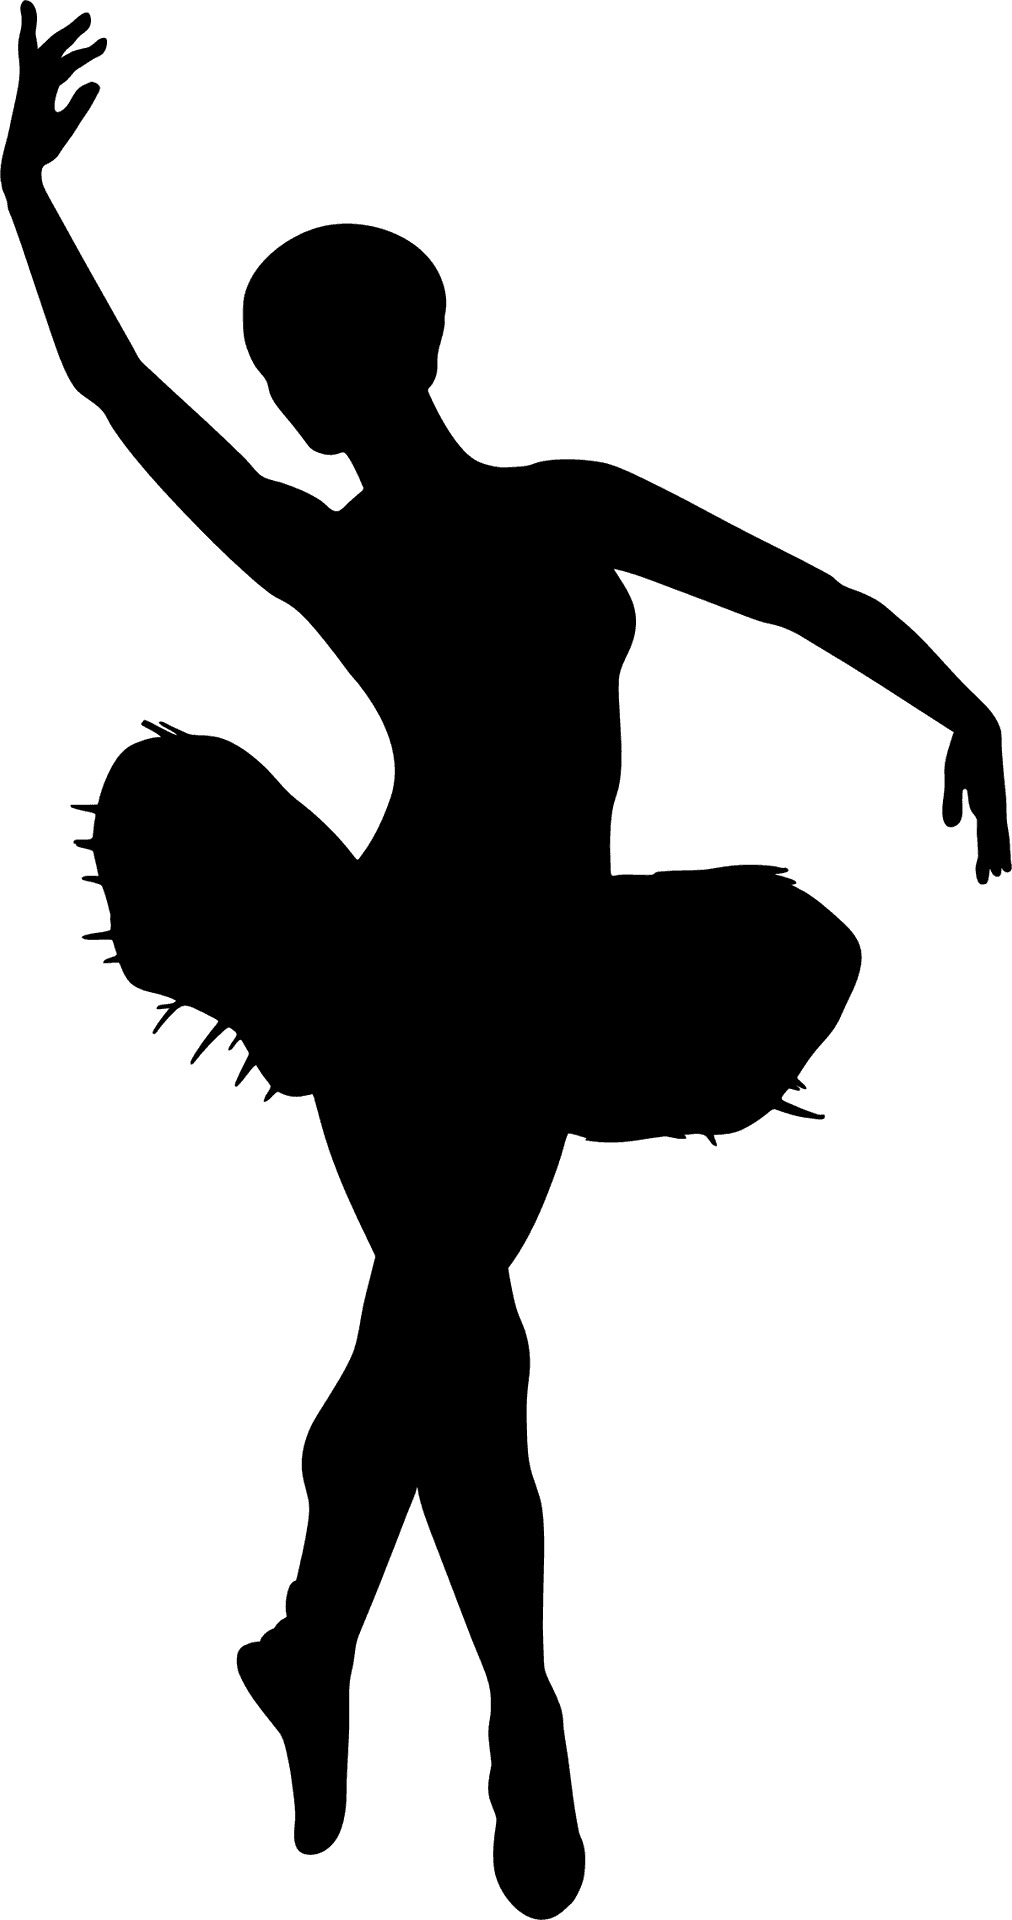 Energetic Dance Move Silhouette PNG image